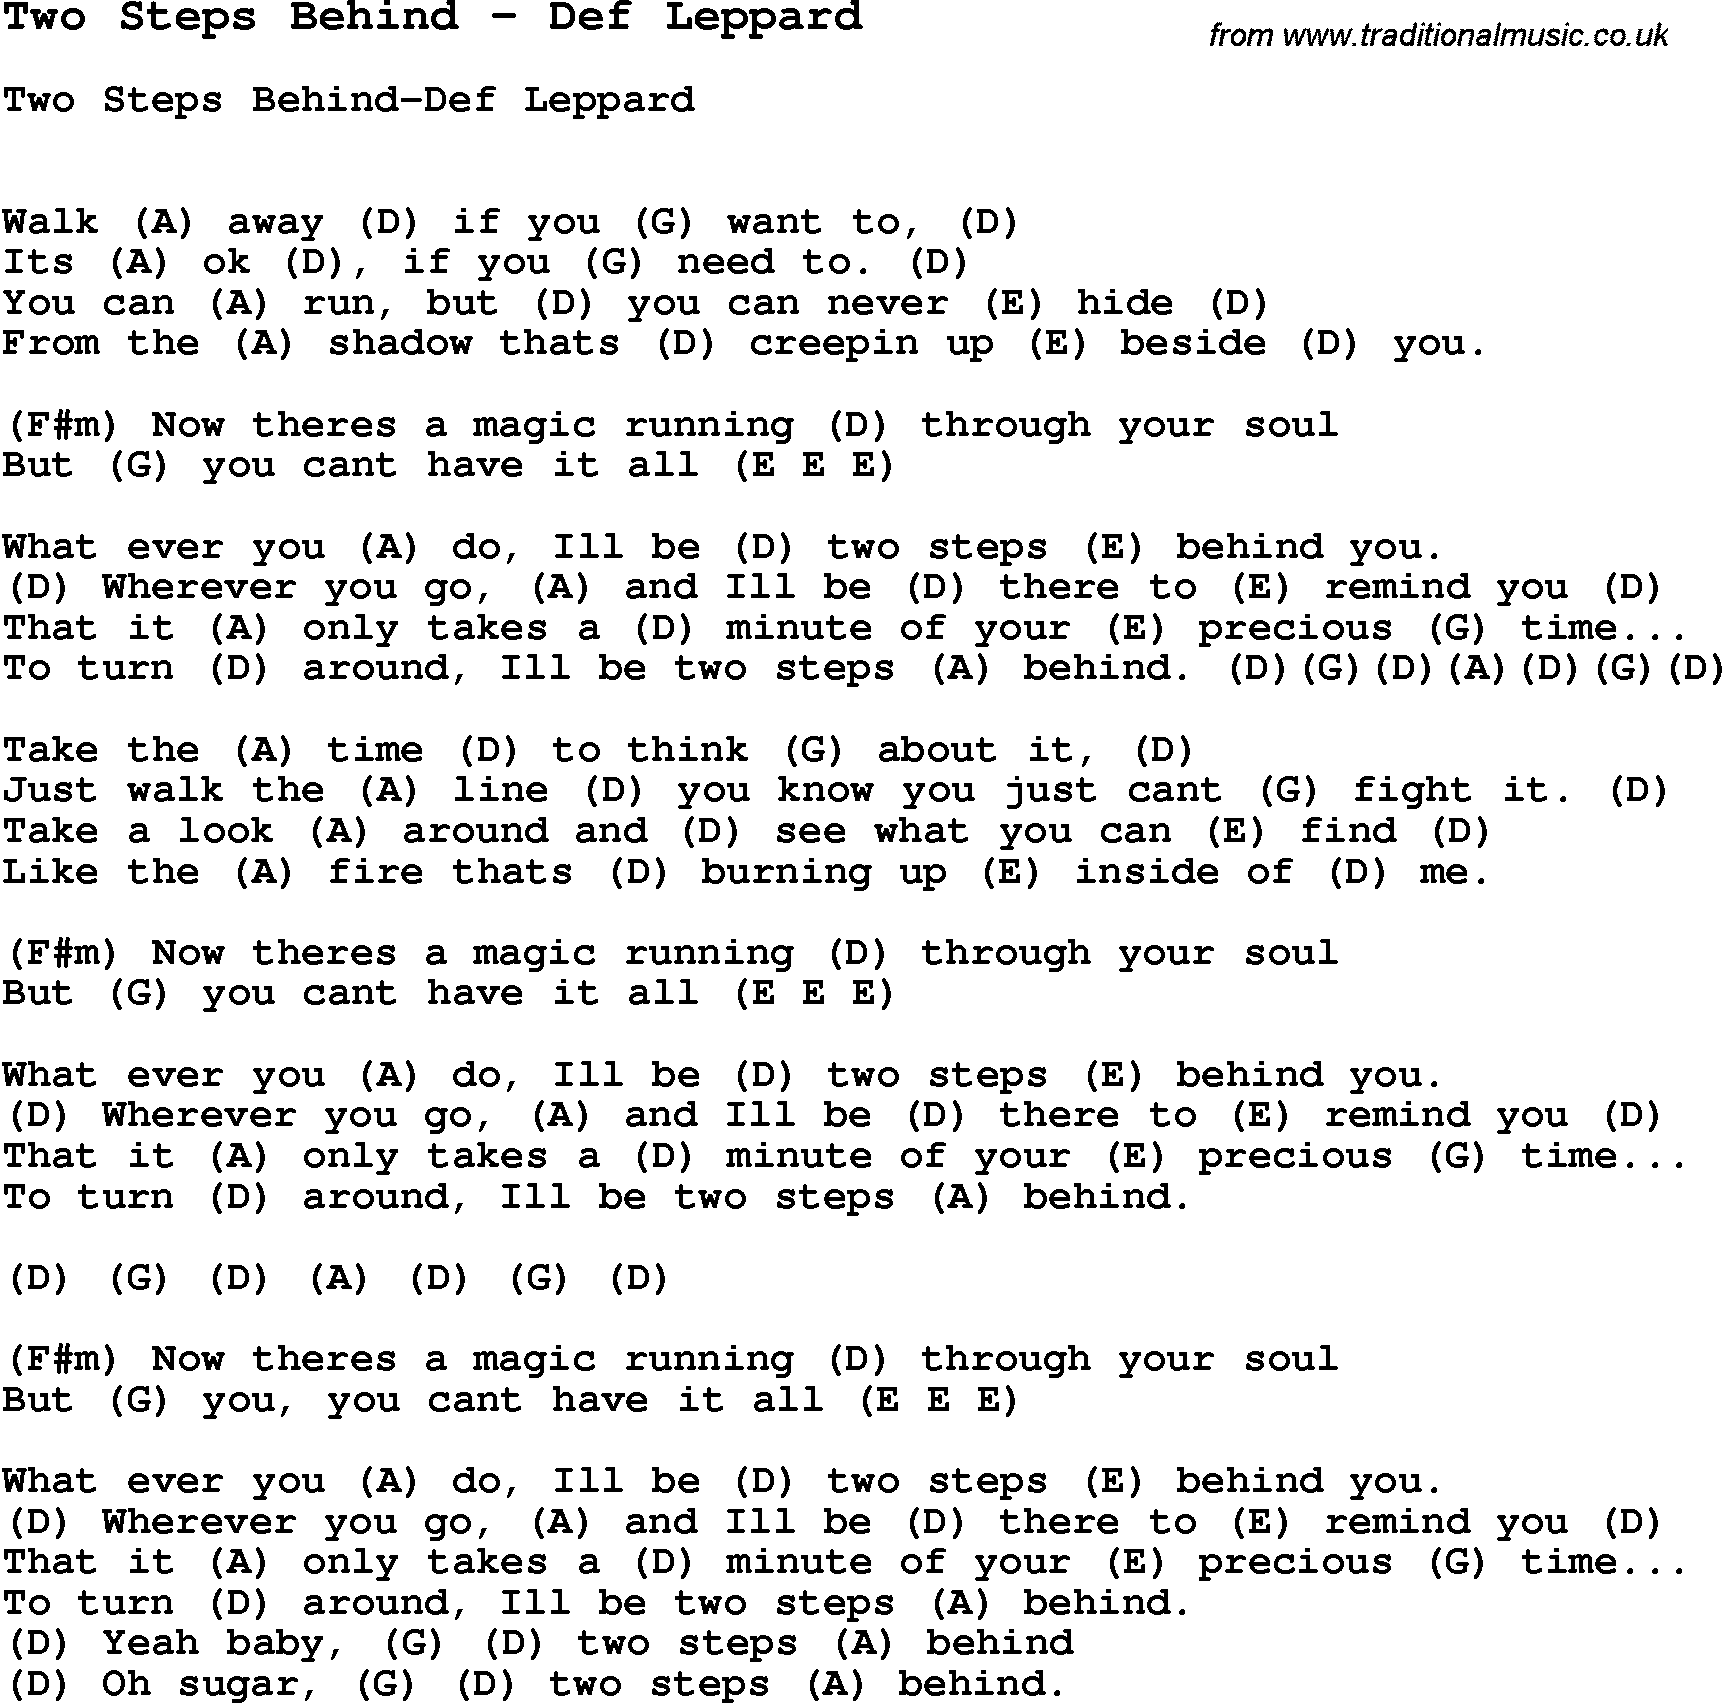 Song Two Steps Behind by Def Leppard, with lyrics for vocal performance and accompaniment chords for Ukulele, Guitar Banjo etc.